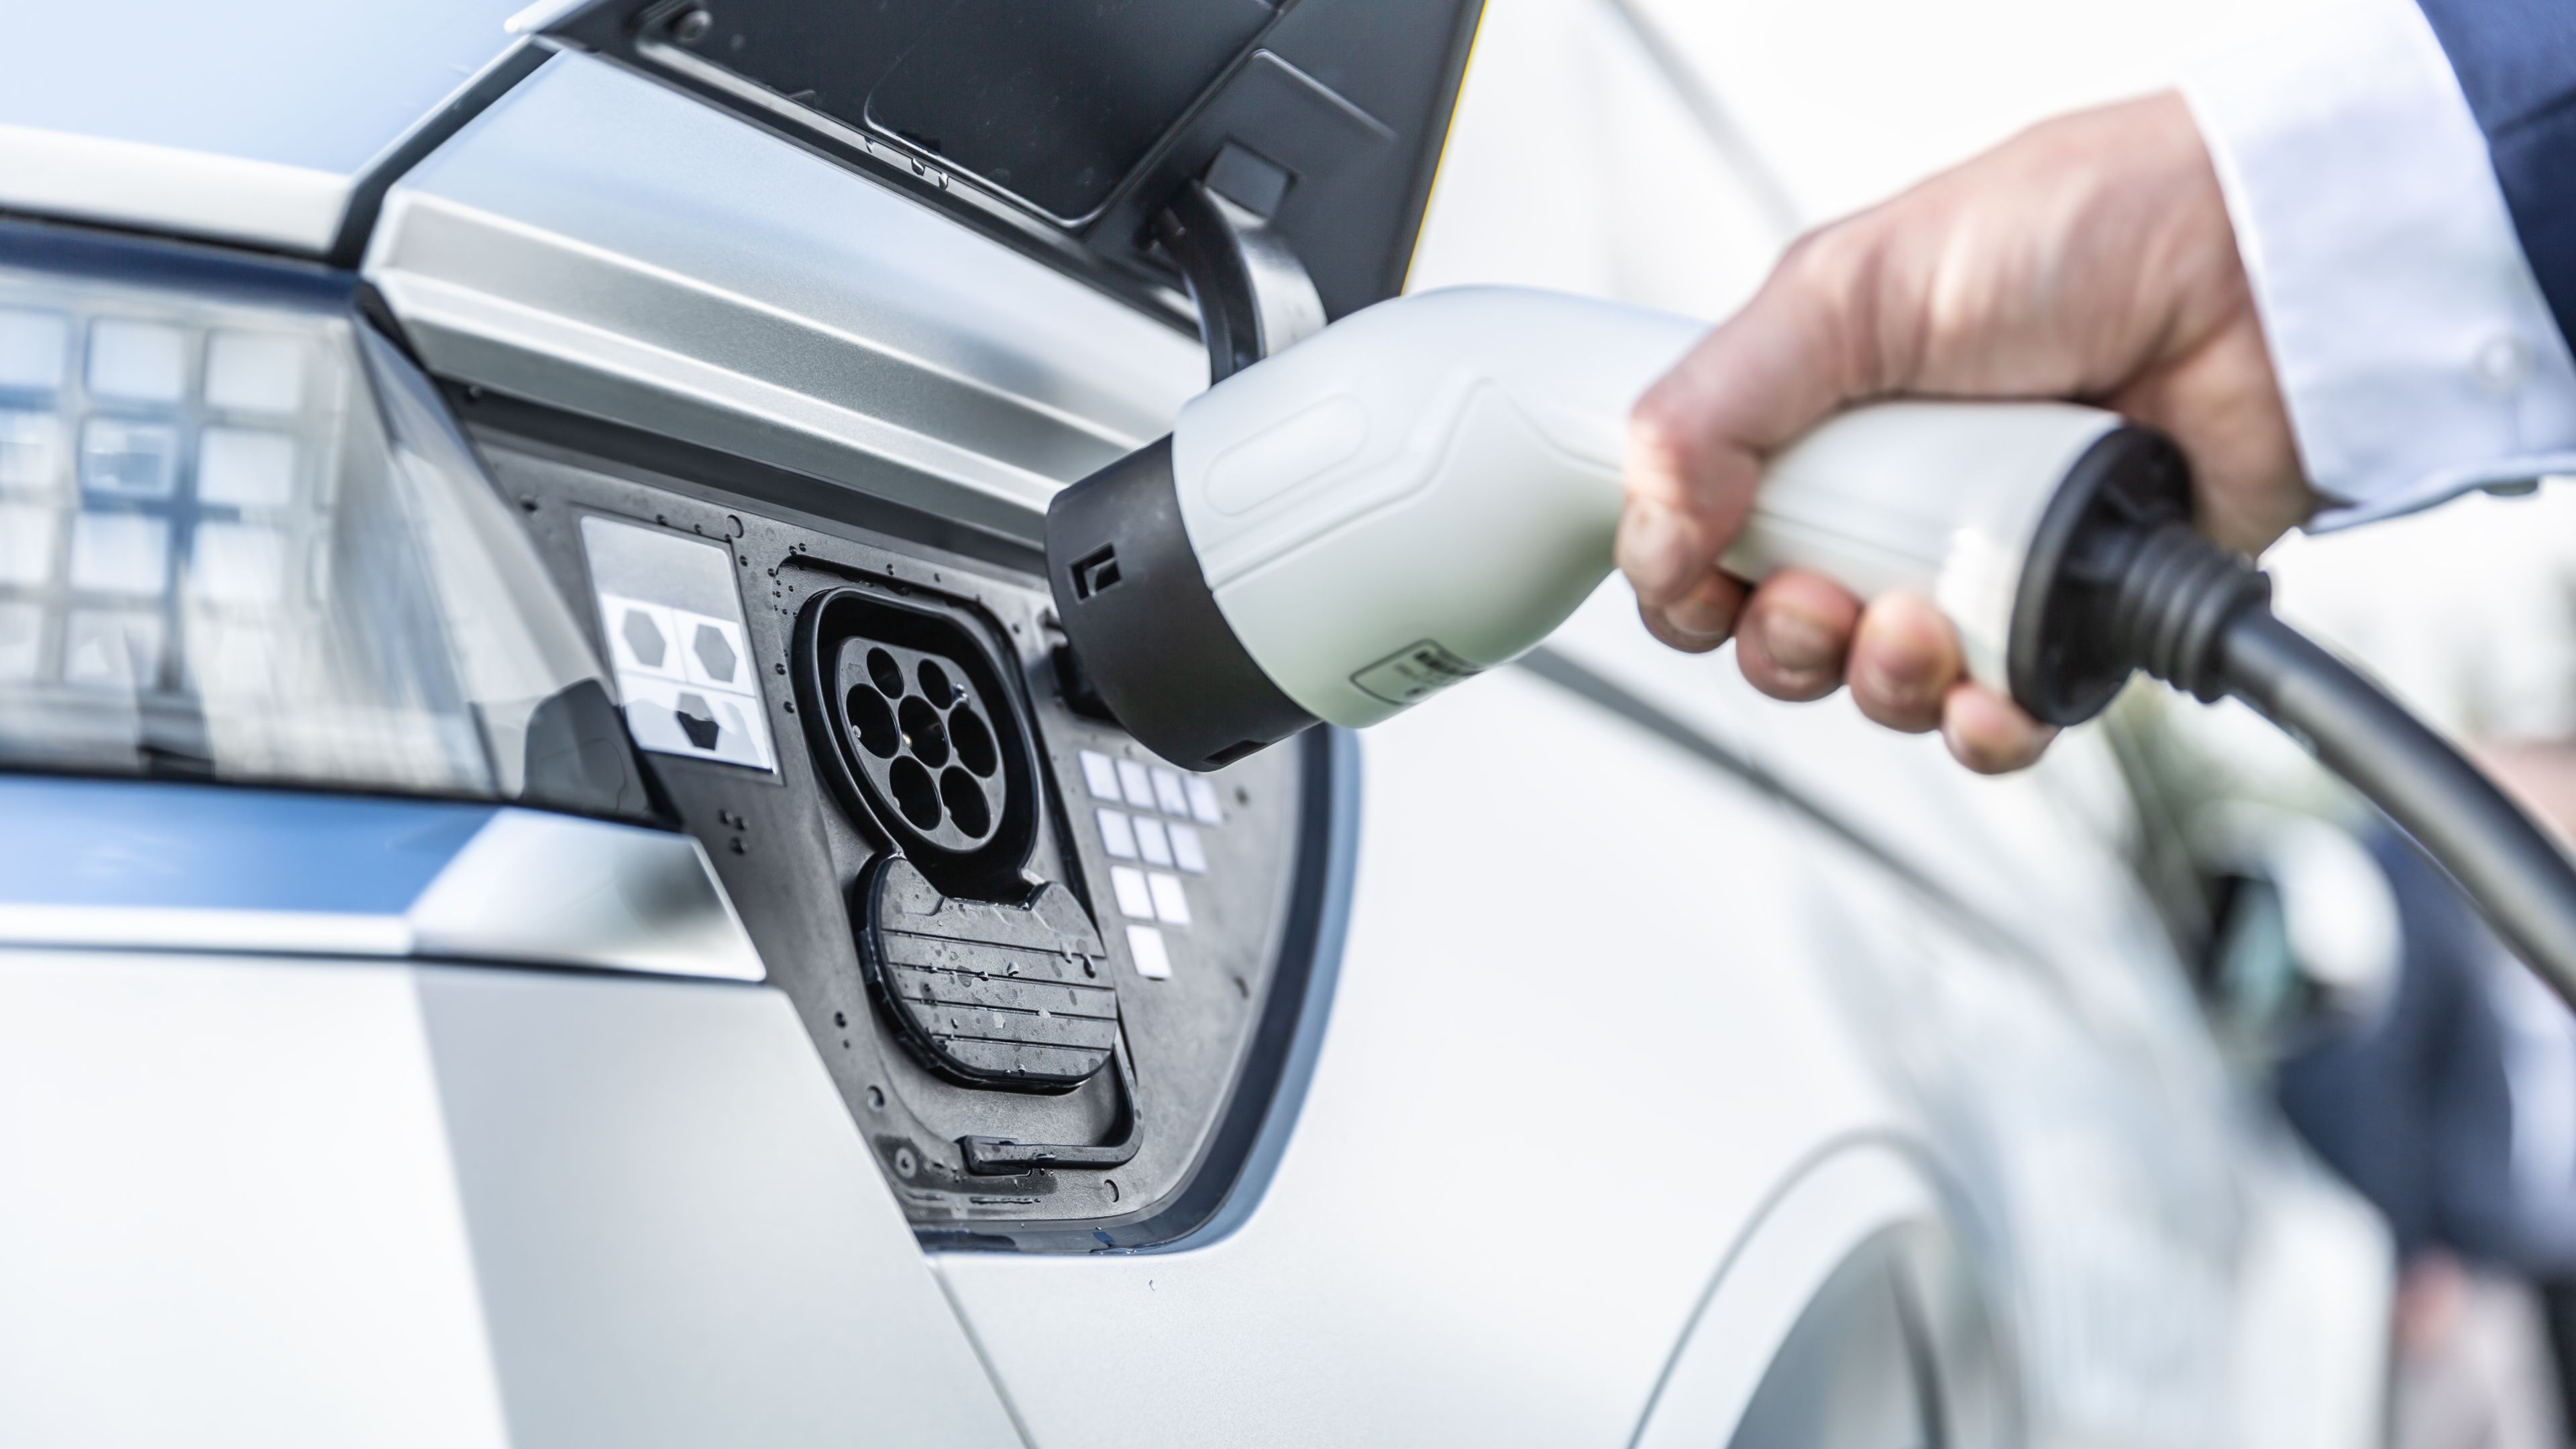 How do you pay to charge an electric car?